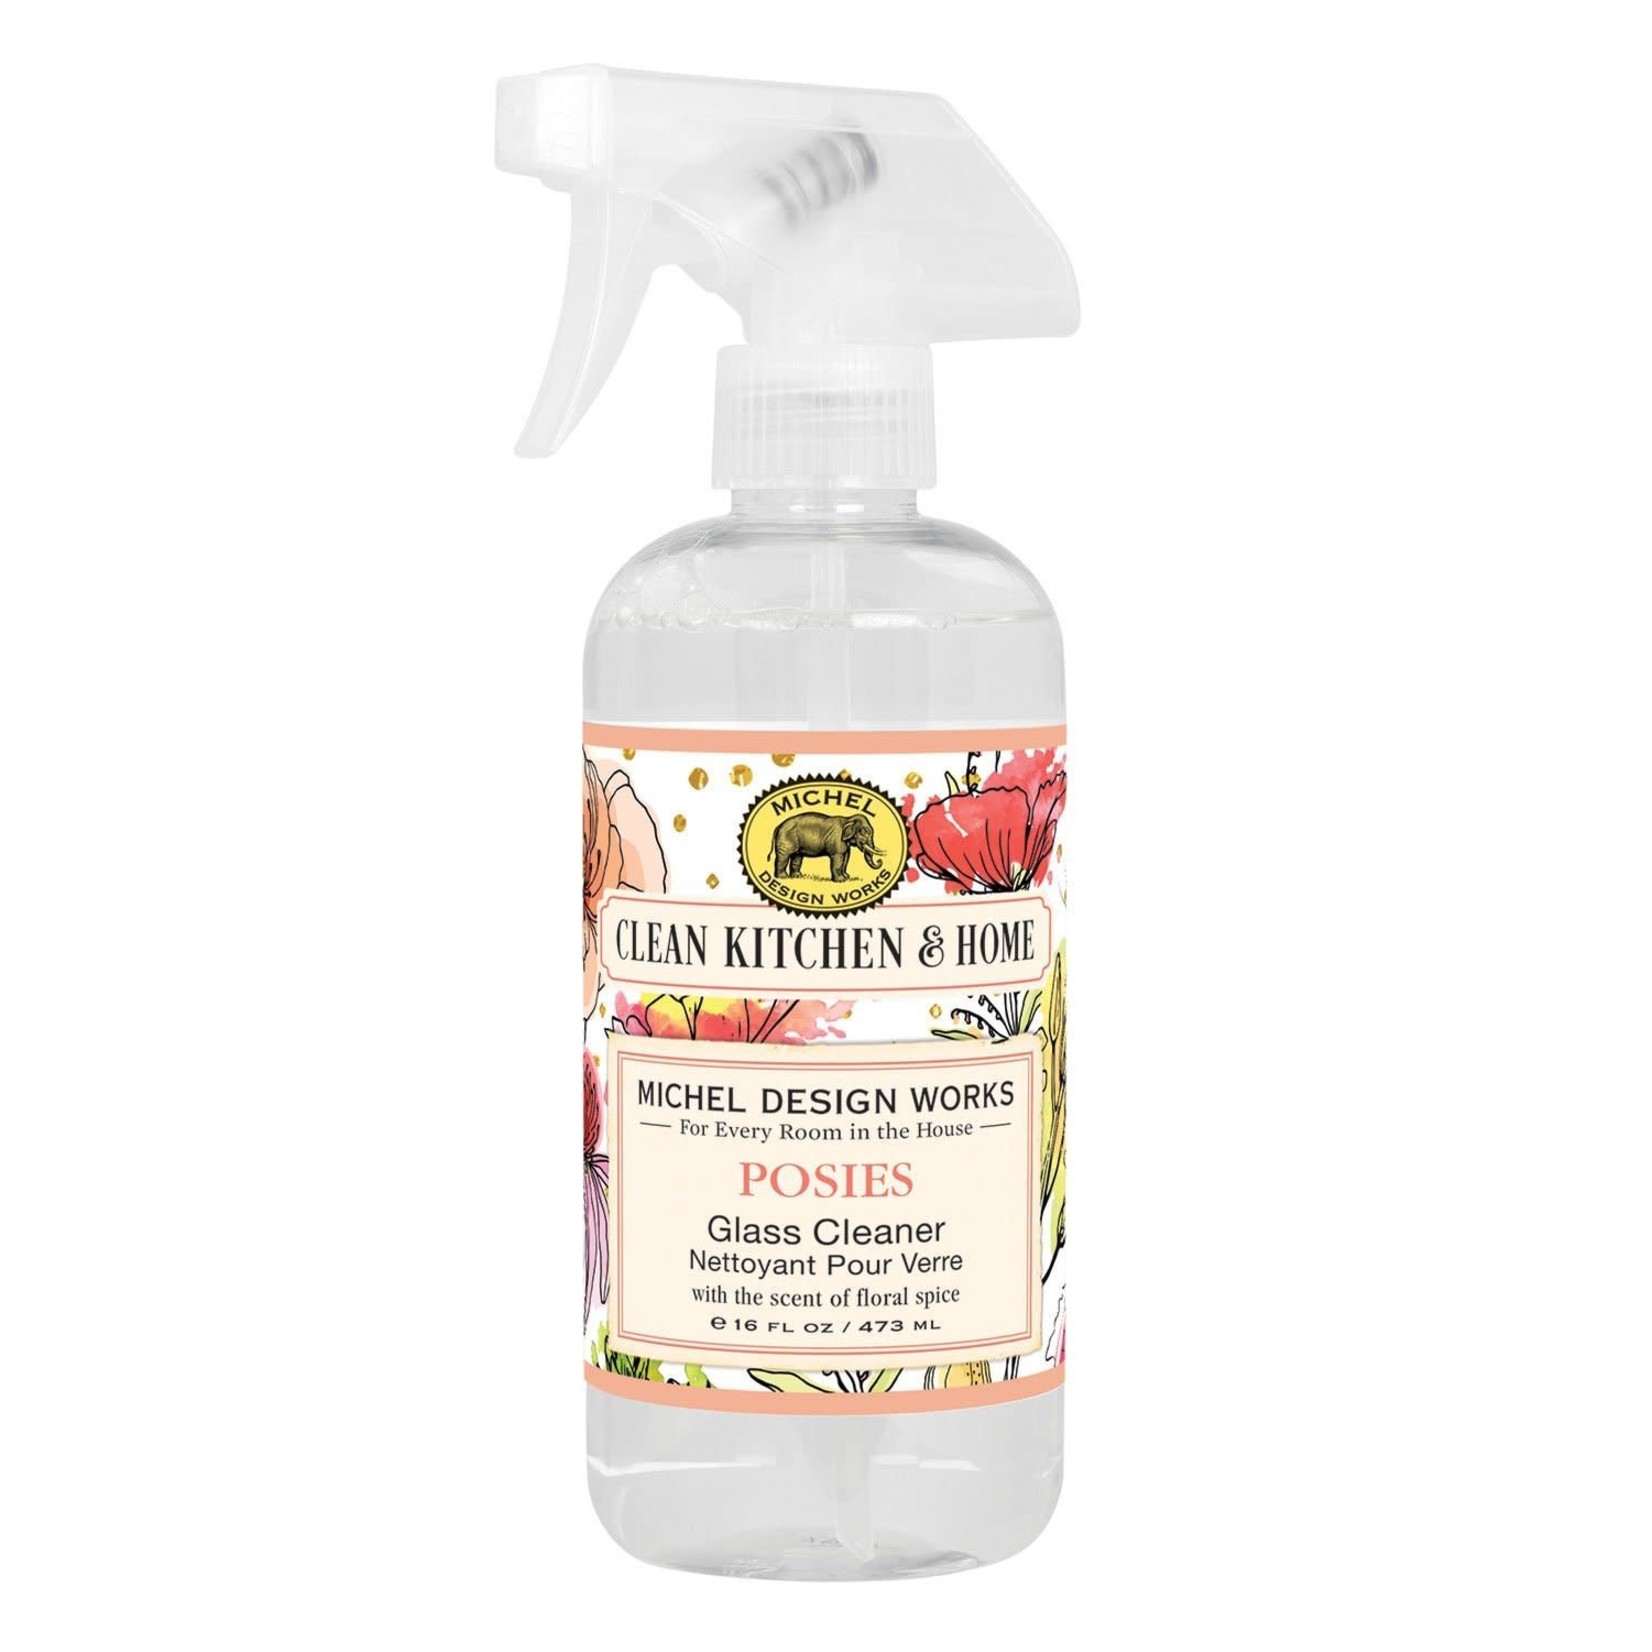 POSIES GLASS CLEANER